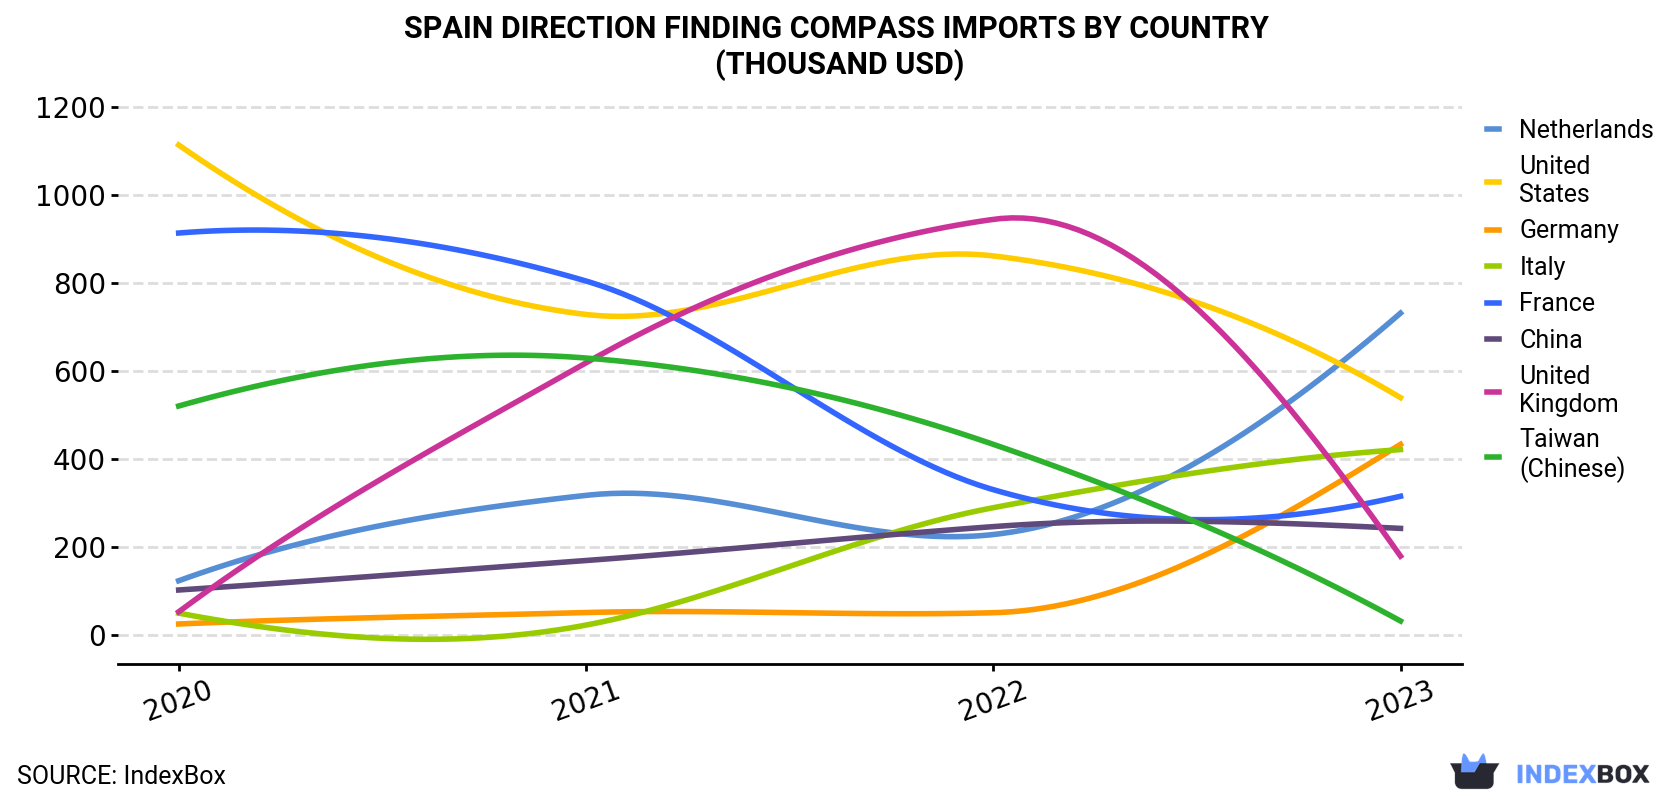 Spain Direction Finding Compass Imports By Country (Thousand USD)